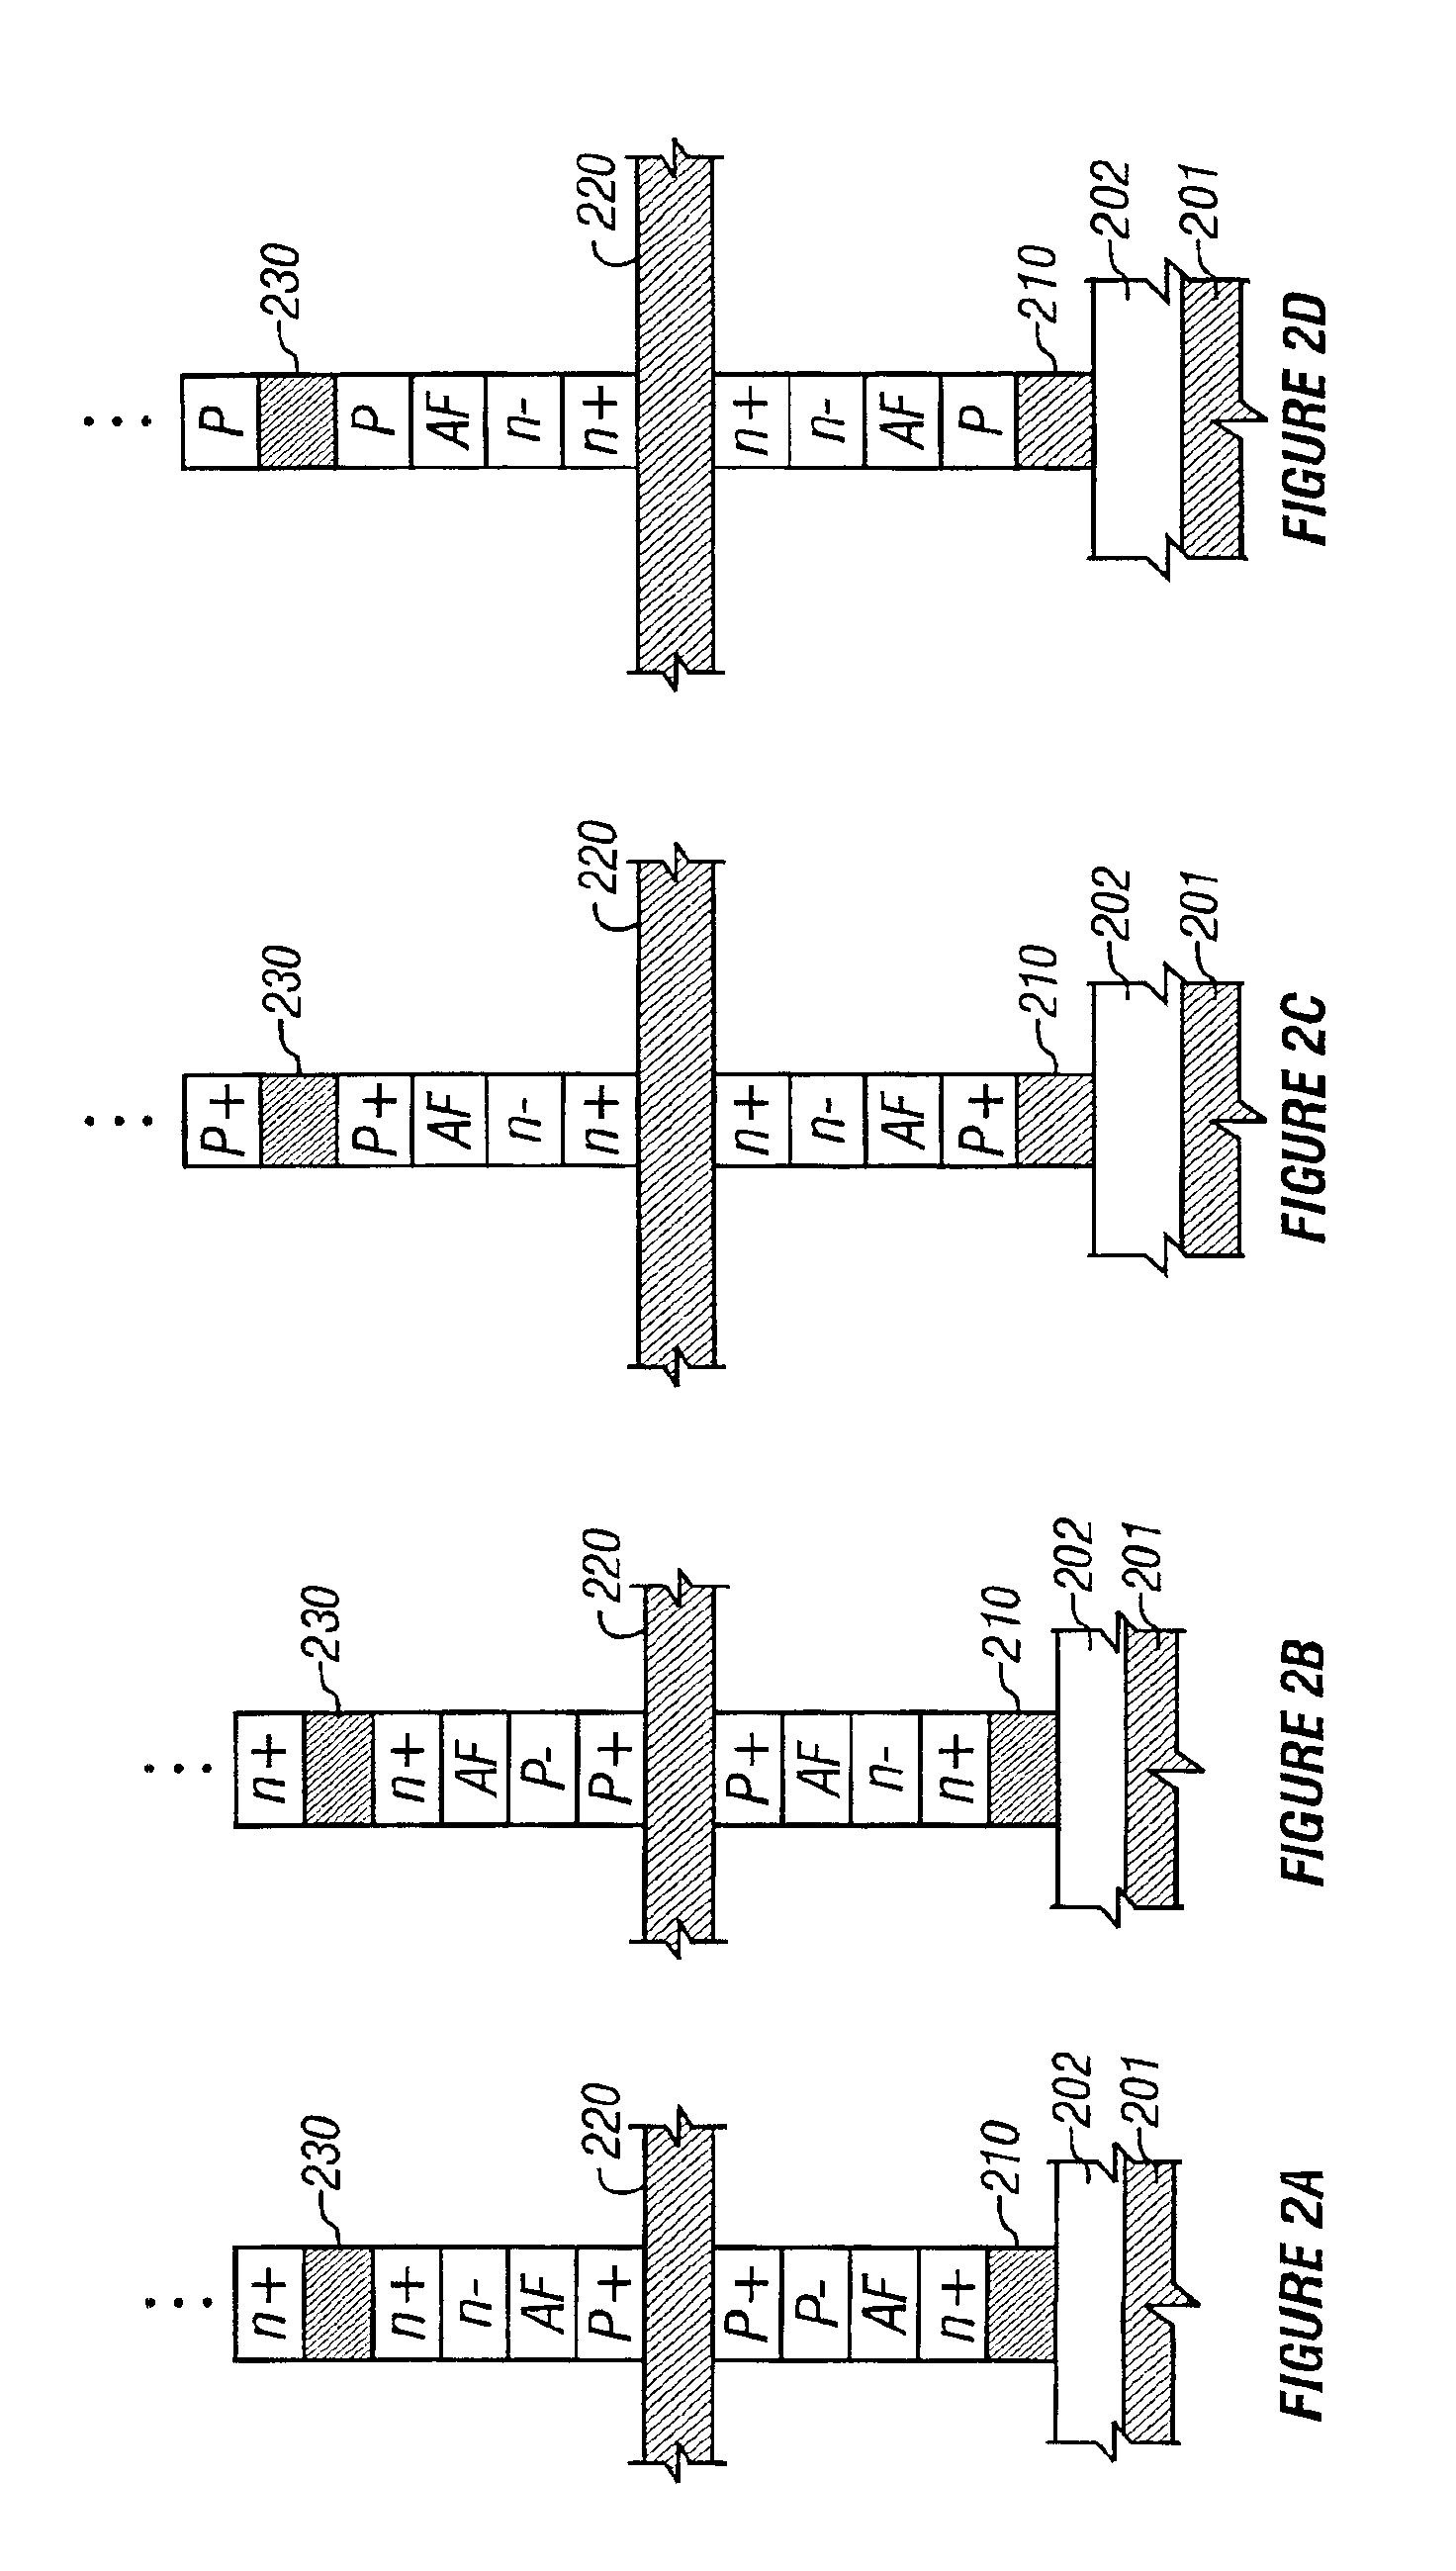 Electrically isolated pillars in active devices